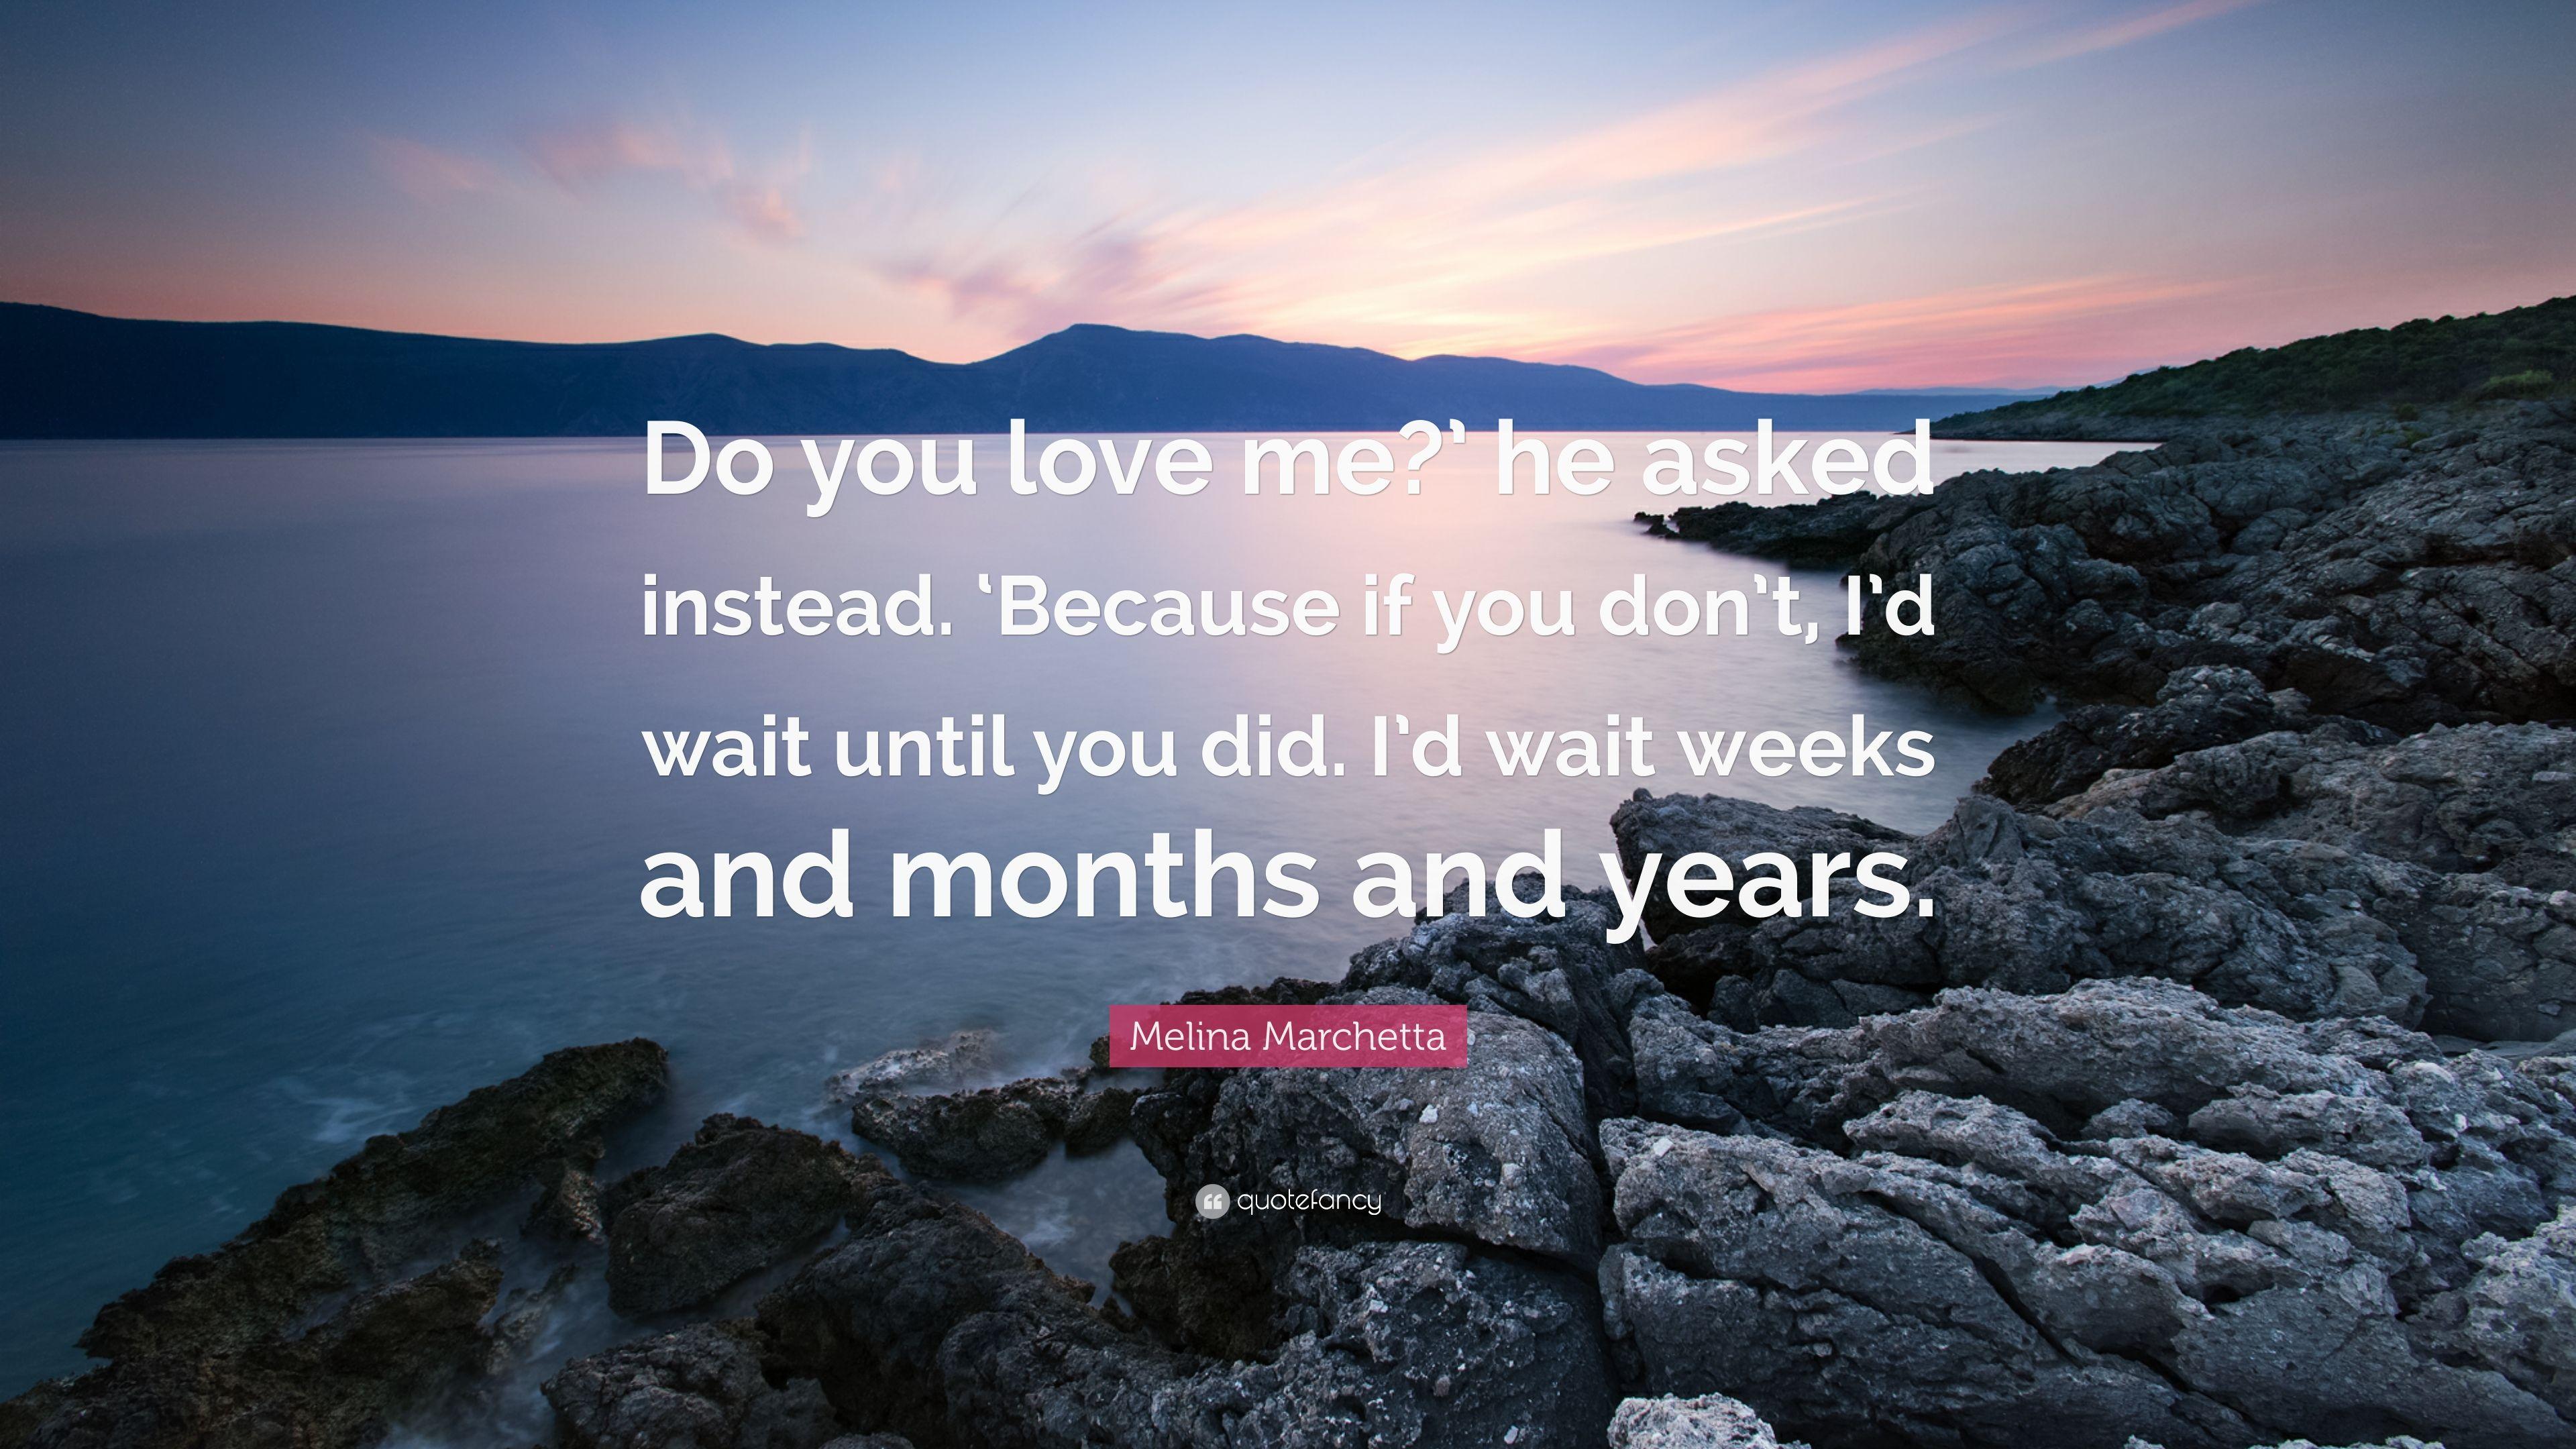 Melina Marchetta Quote: “Do you love me?' he asked instead. 'Because